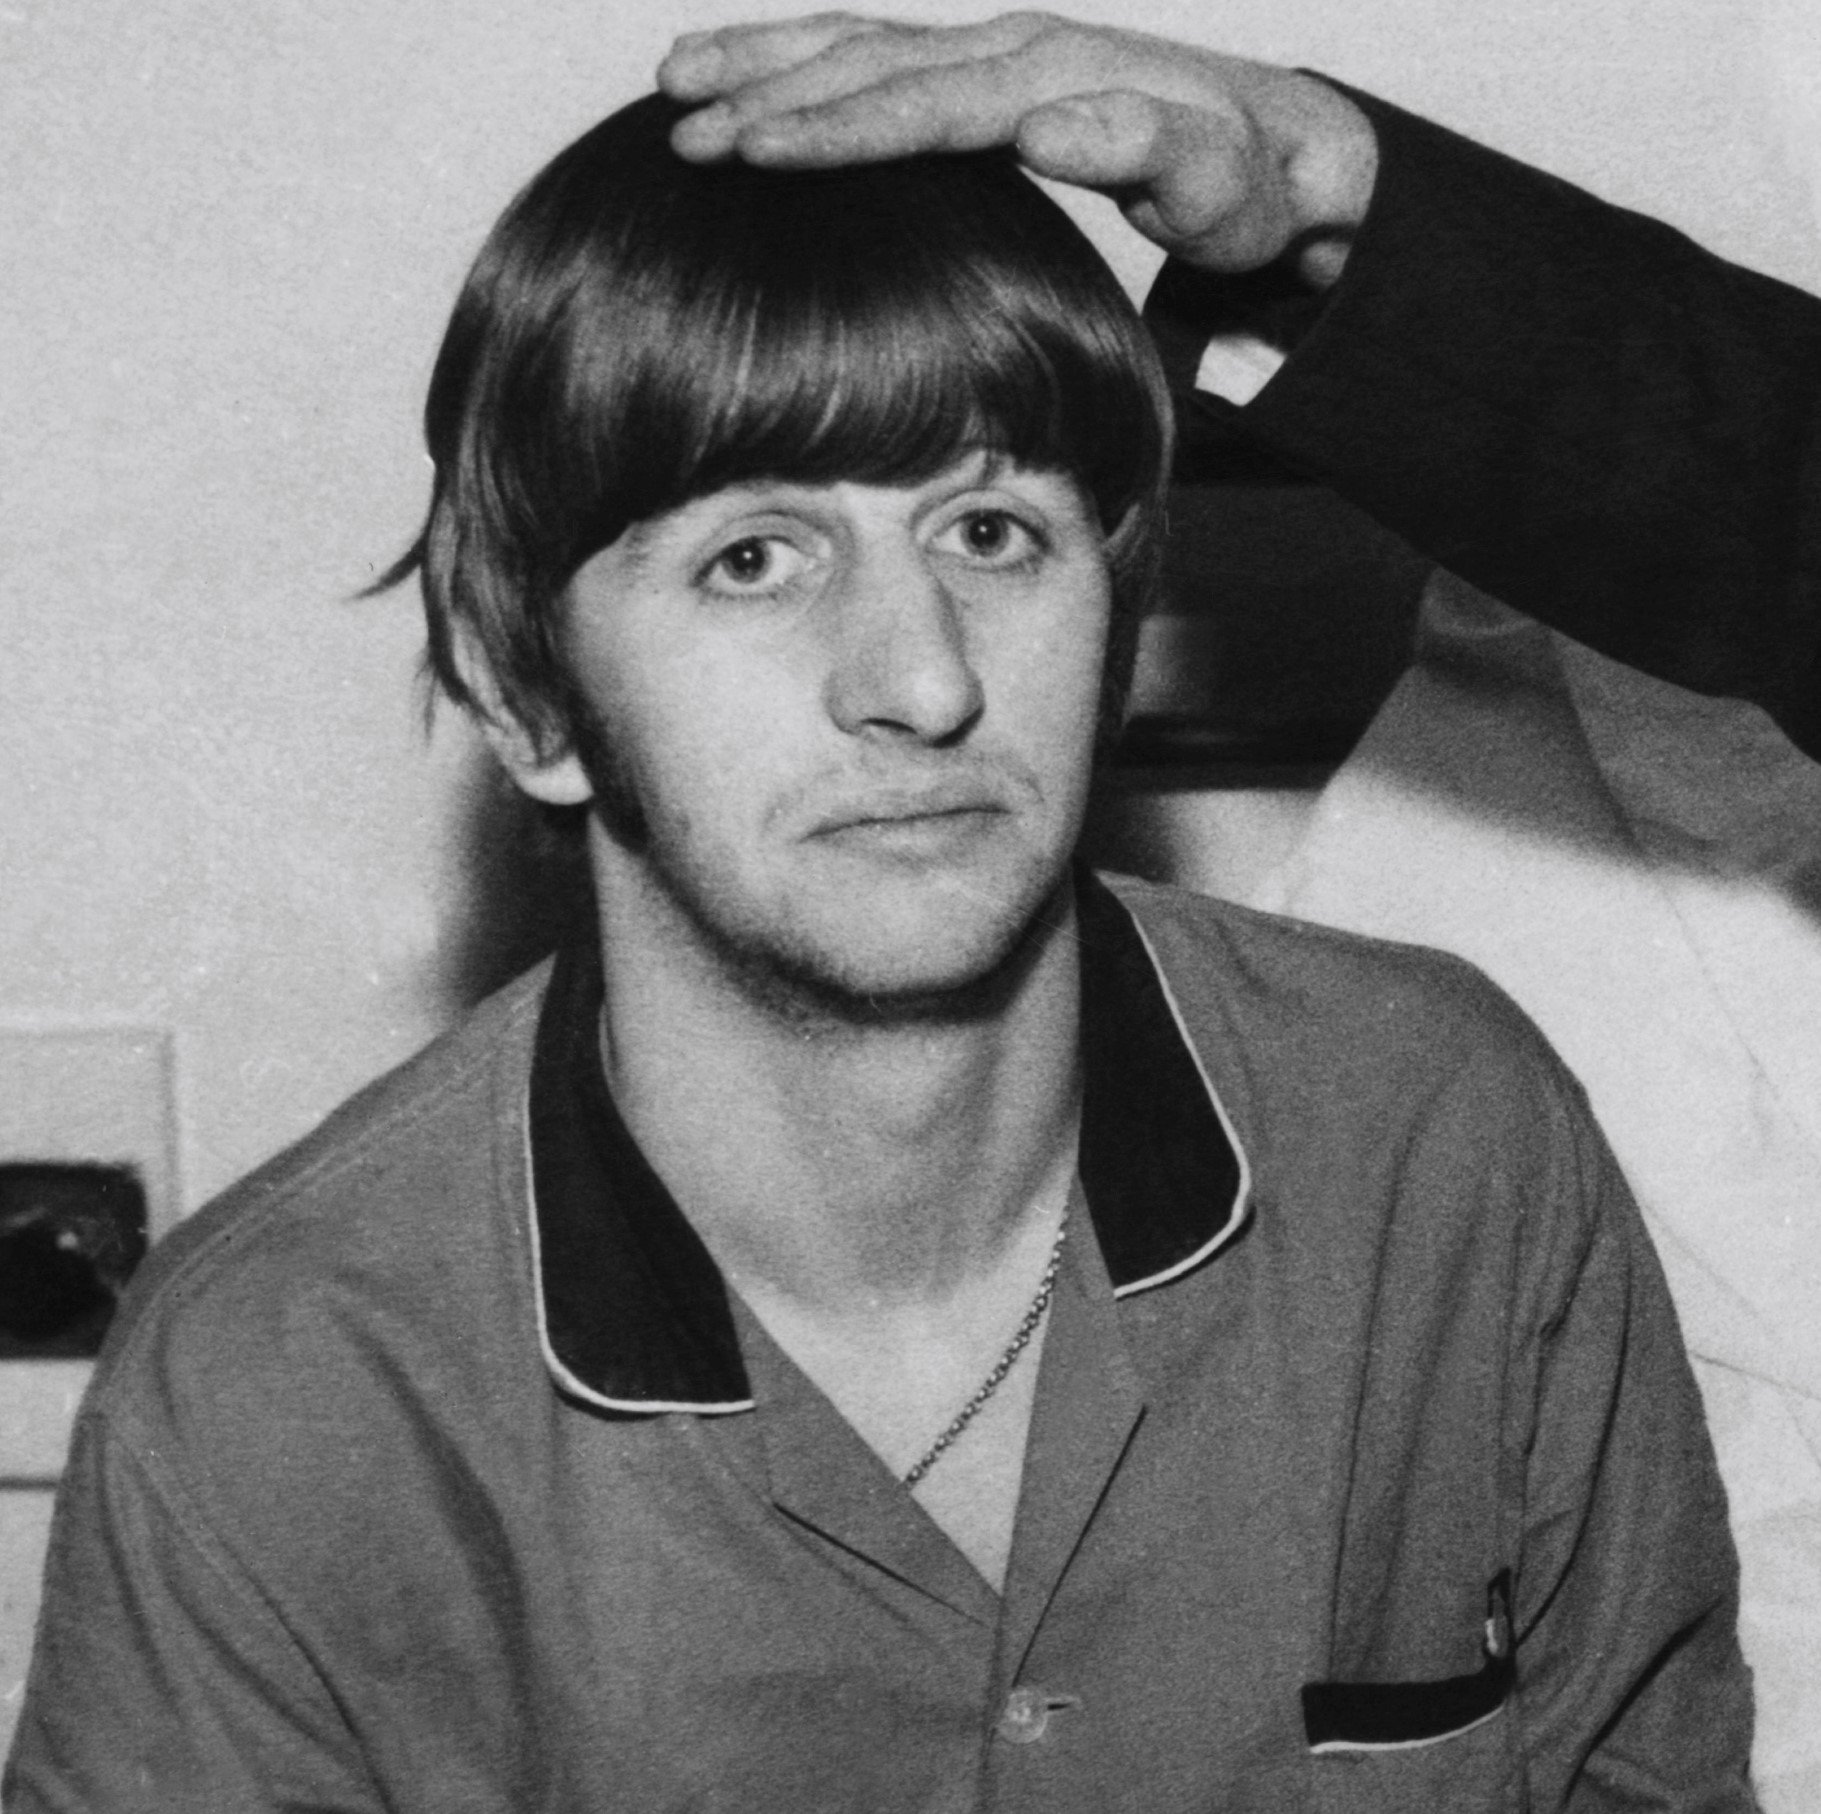 Ringo Starr Remembered Hearing the BBC Play The Beatles' 'Love Me